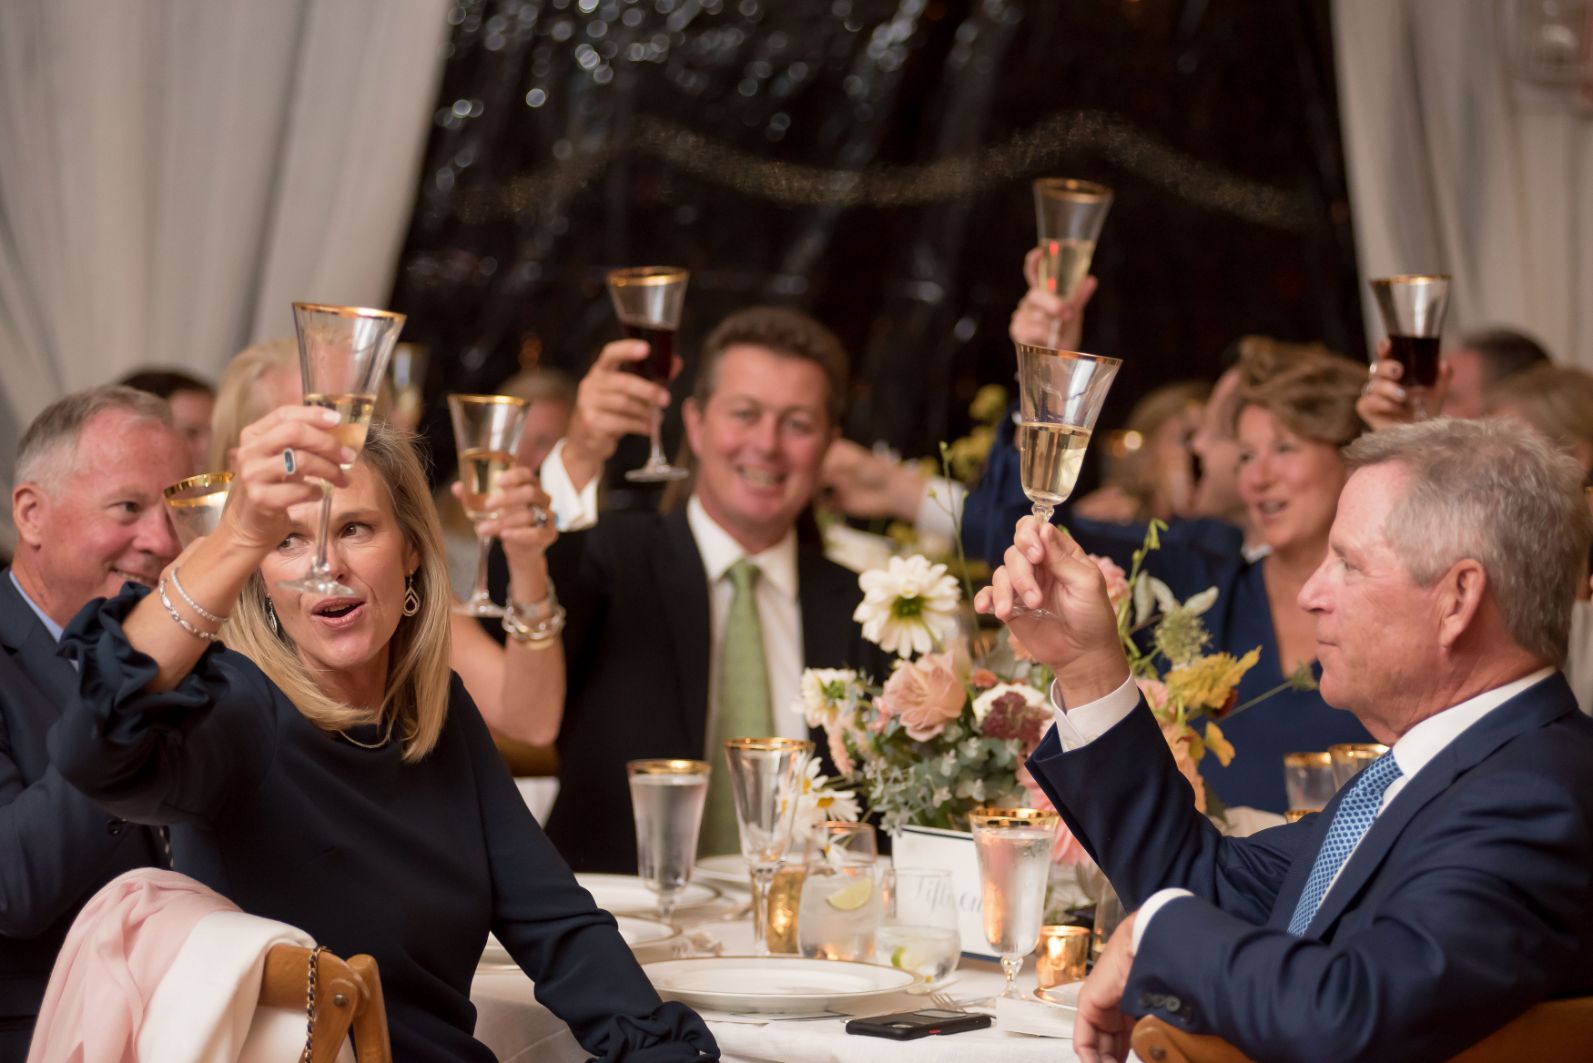 Guests toasting